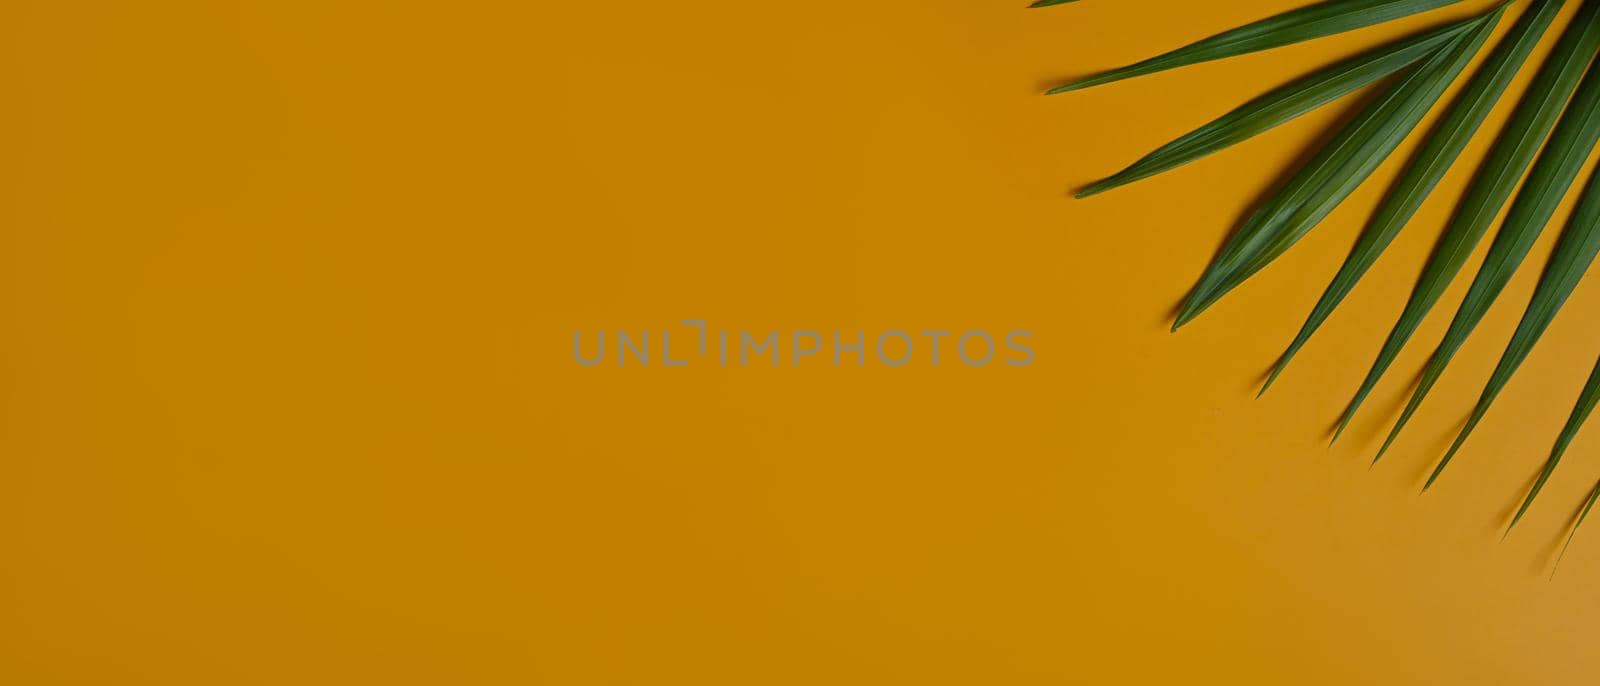 Flat lay tropical palm leaves on yellow background with copy space for text. Summer background. by prathanchorruangsak